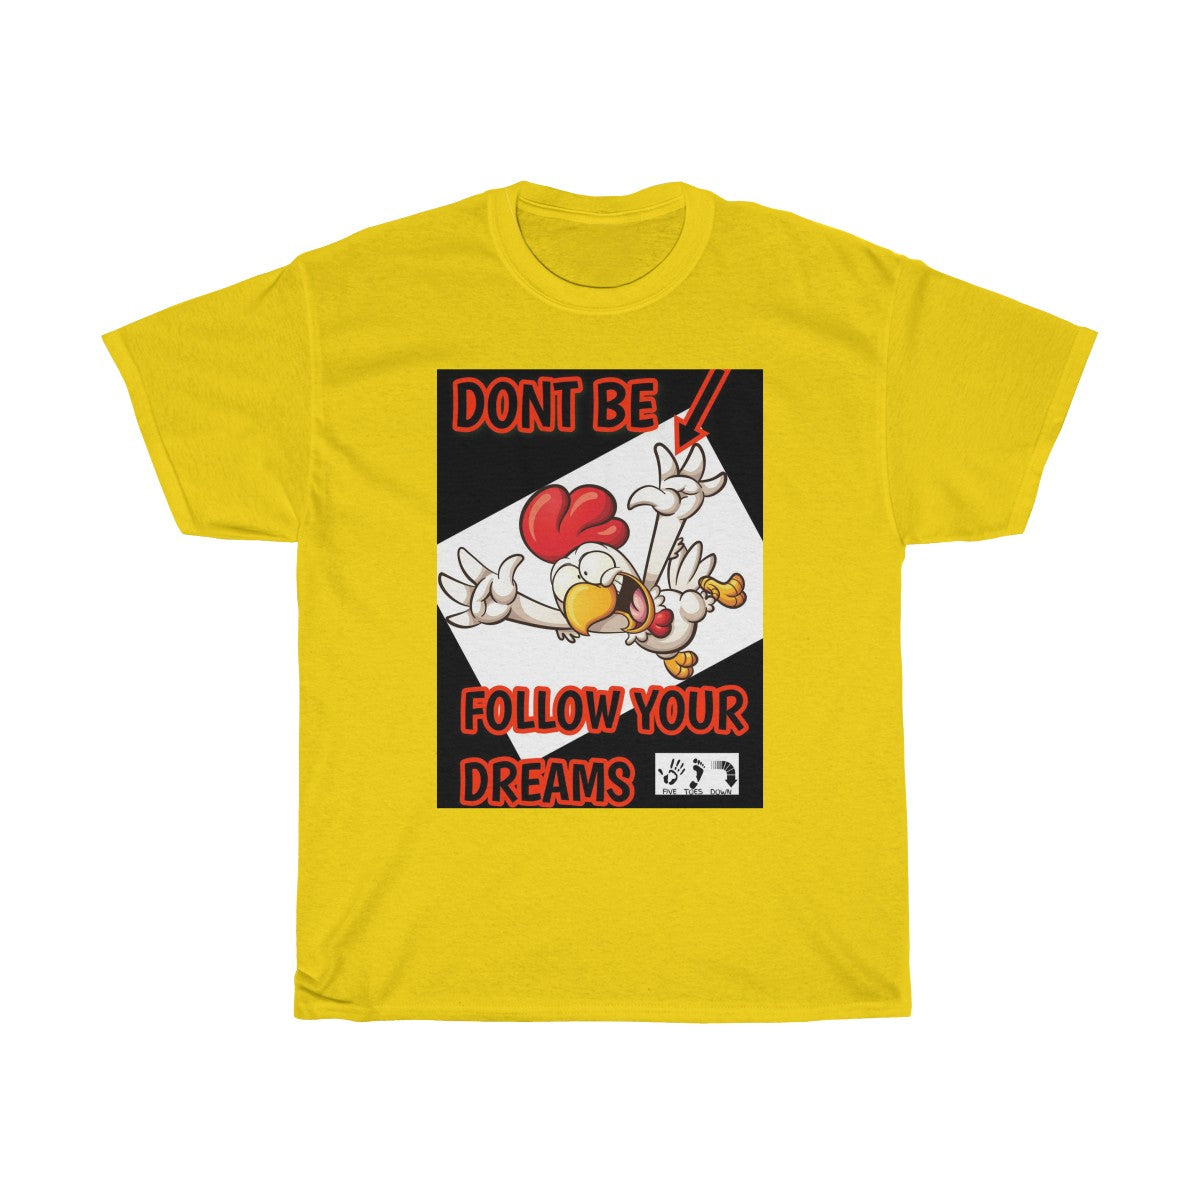 Five Toes Down Dont Be Chicken Unisex Tee